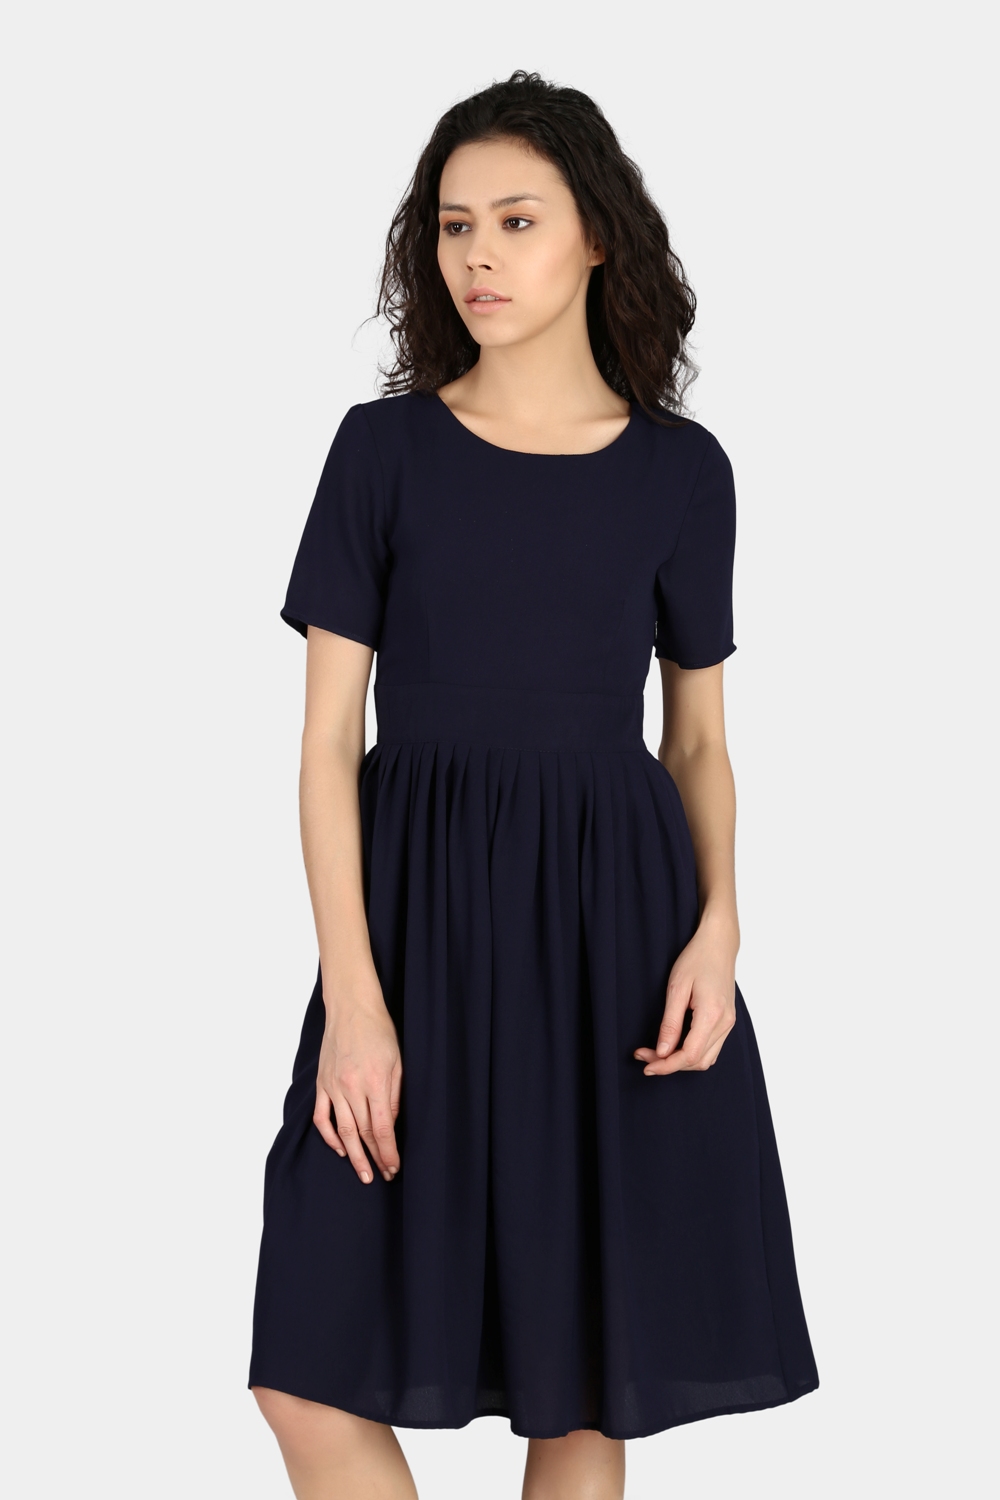 Navy Blue Gathered Sheath Casual - Front